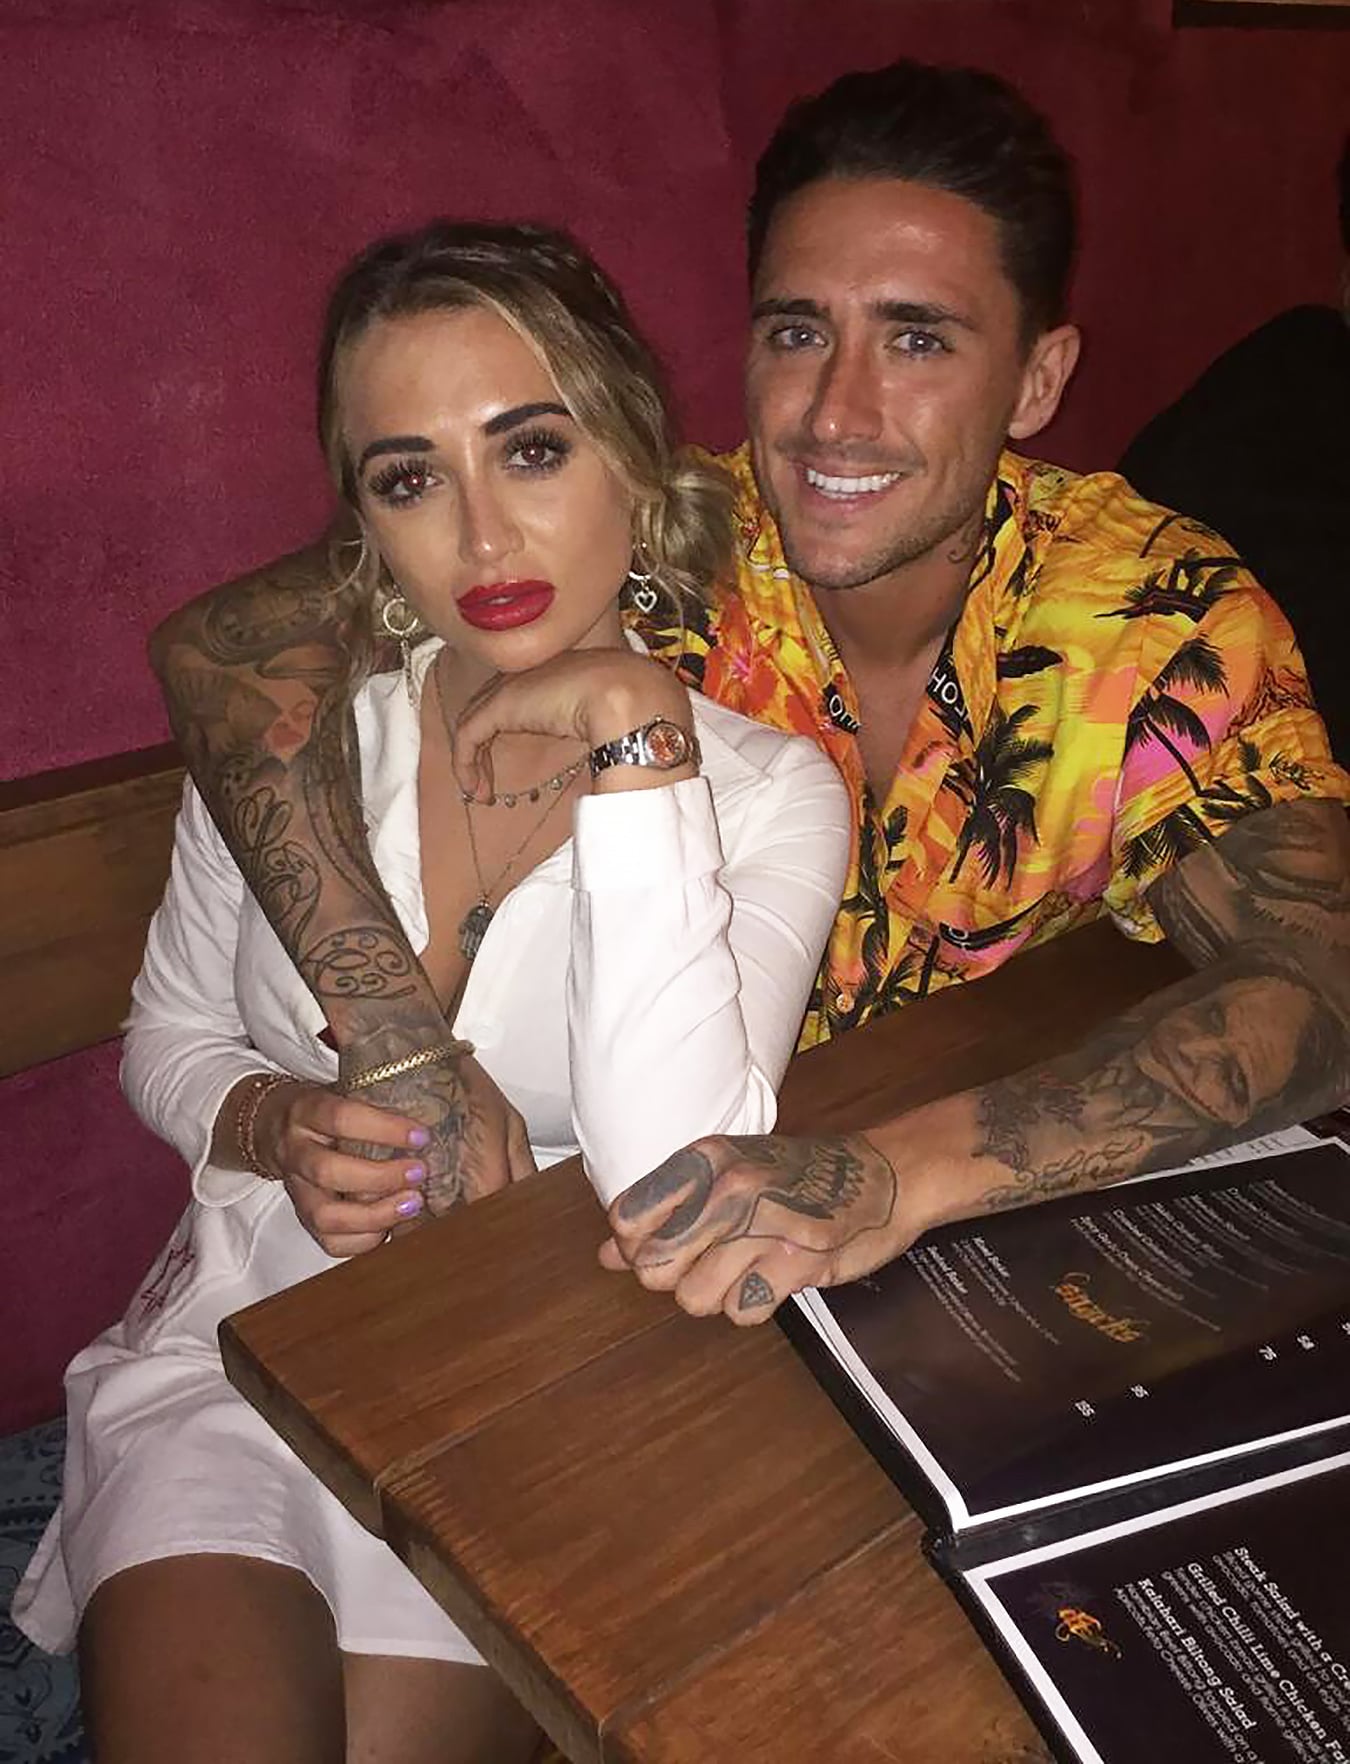 Stephen Bear (right) has since been sentenced to 21 months in prison (Image Source: ITV2)